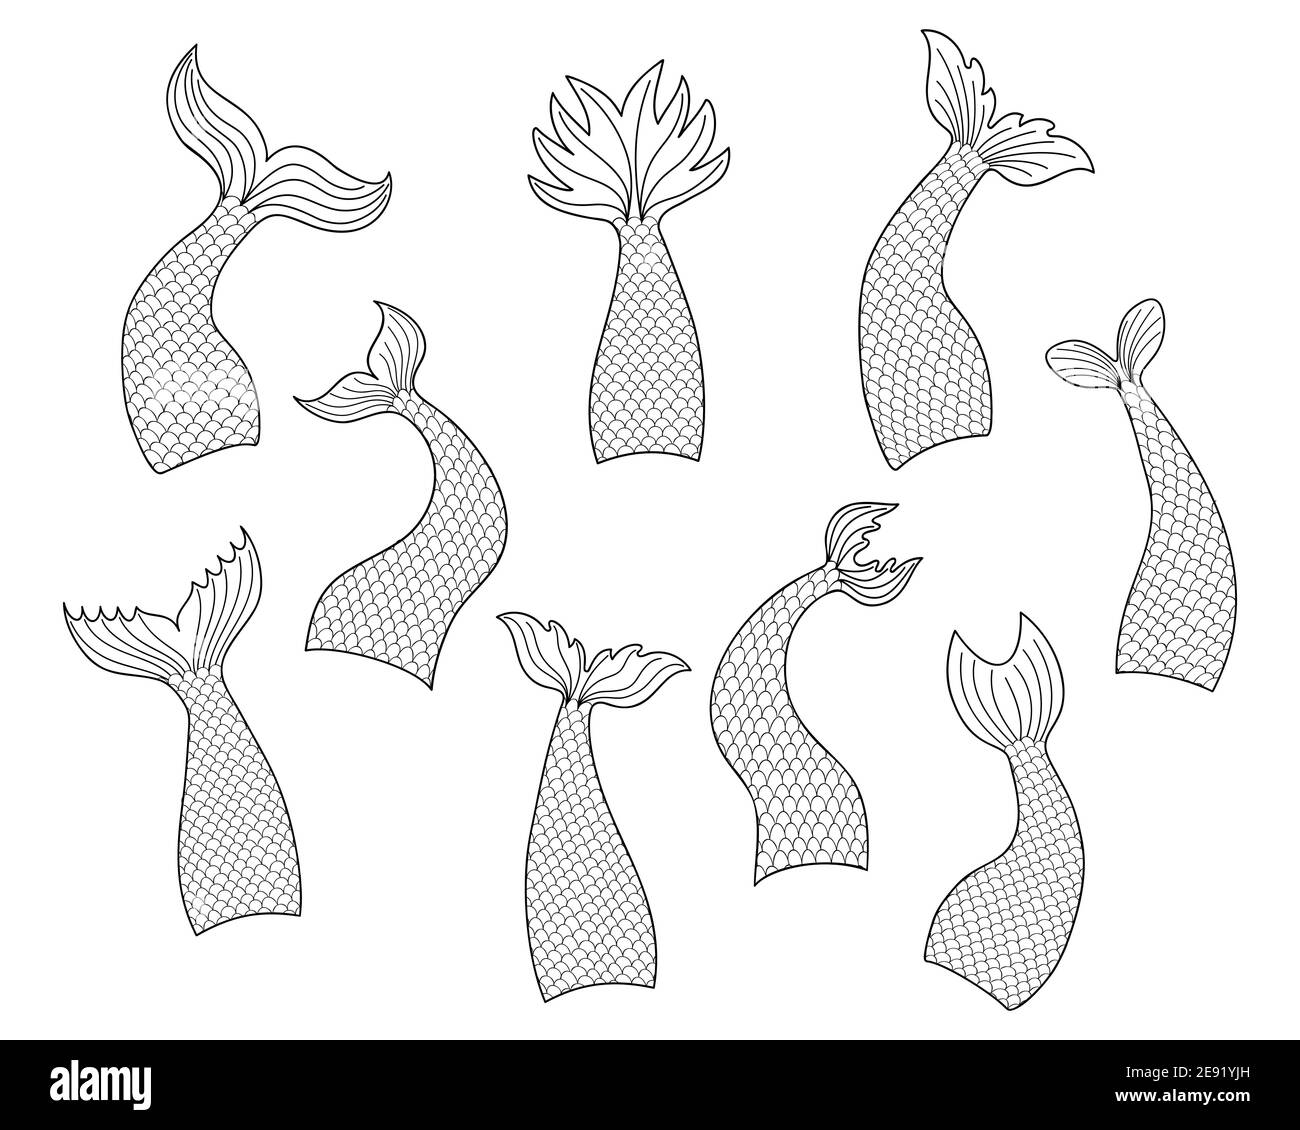 Set of hand drawn mermaid tails in doodle style isolated on white background. Black and white vector outline illustration for print design or coloring books. Stock Vector